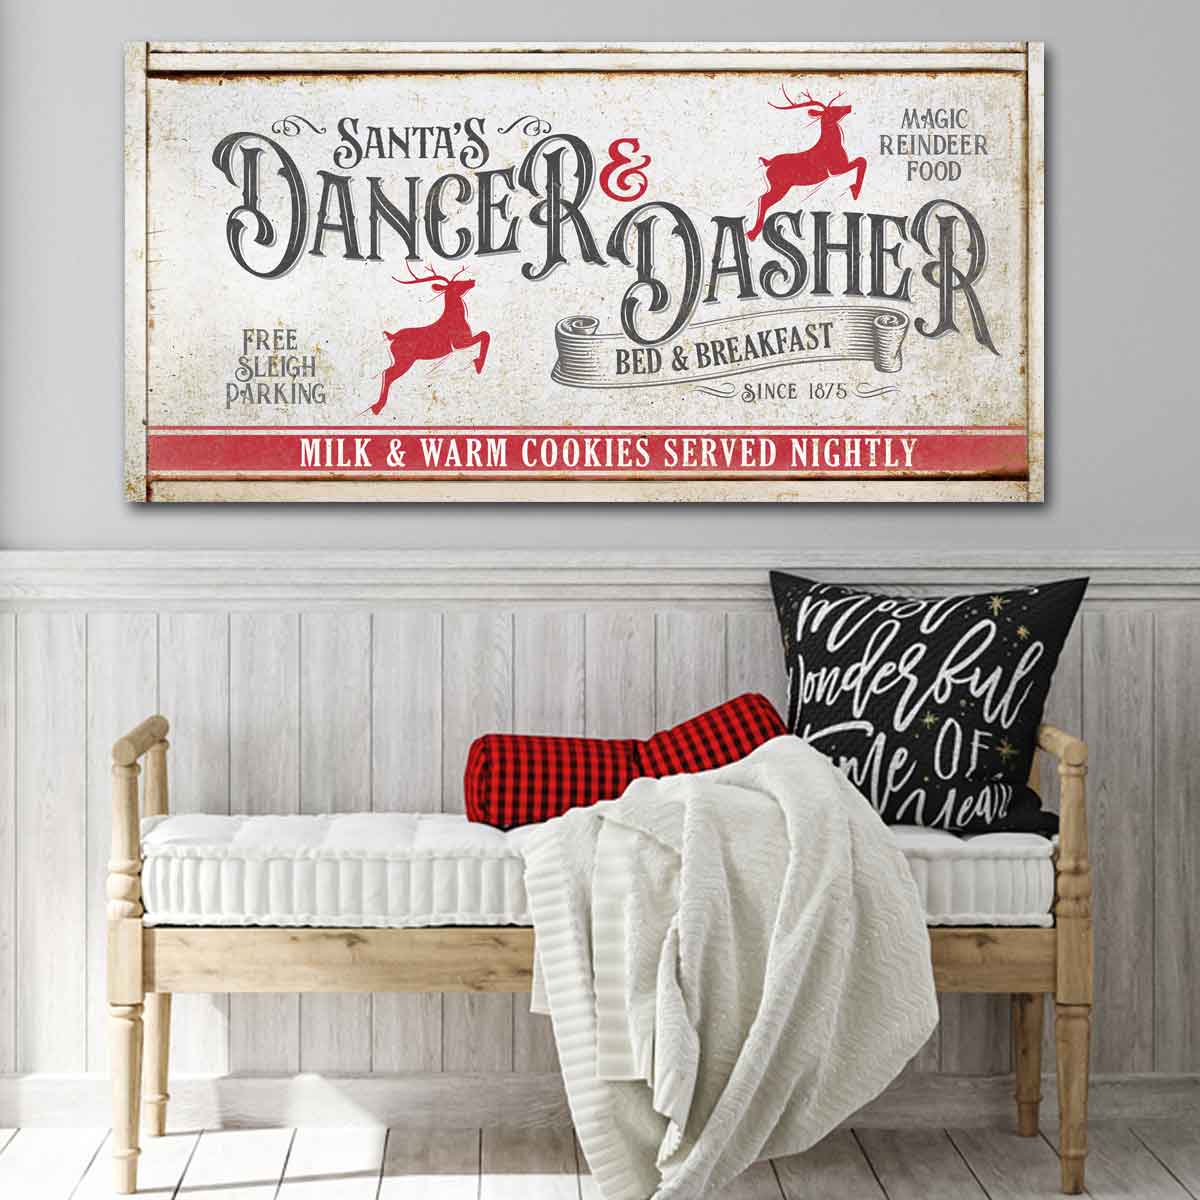 Rustic Christmas Sign with Reindeer and words "Santa's Dancer & Dasher Bed & Breakfast" Since 1875 in vintage distressed wood frame styleBed & Breakfast